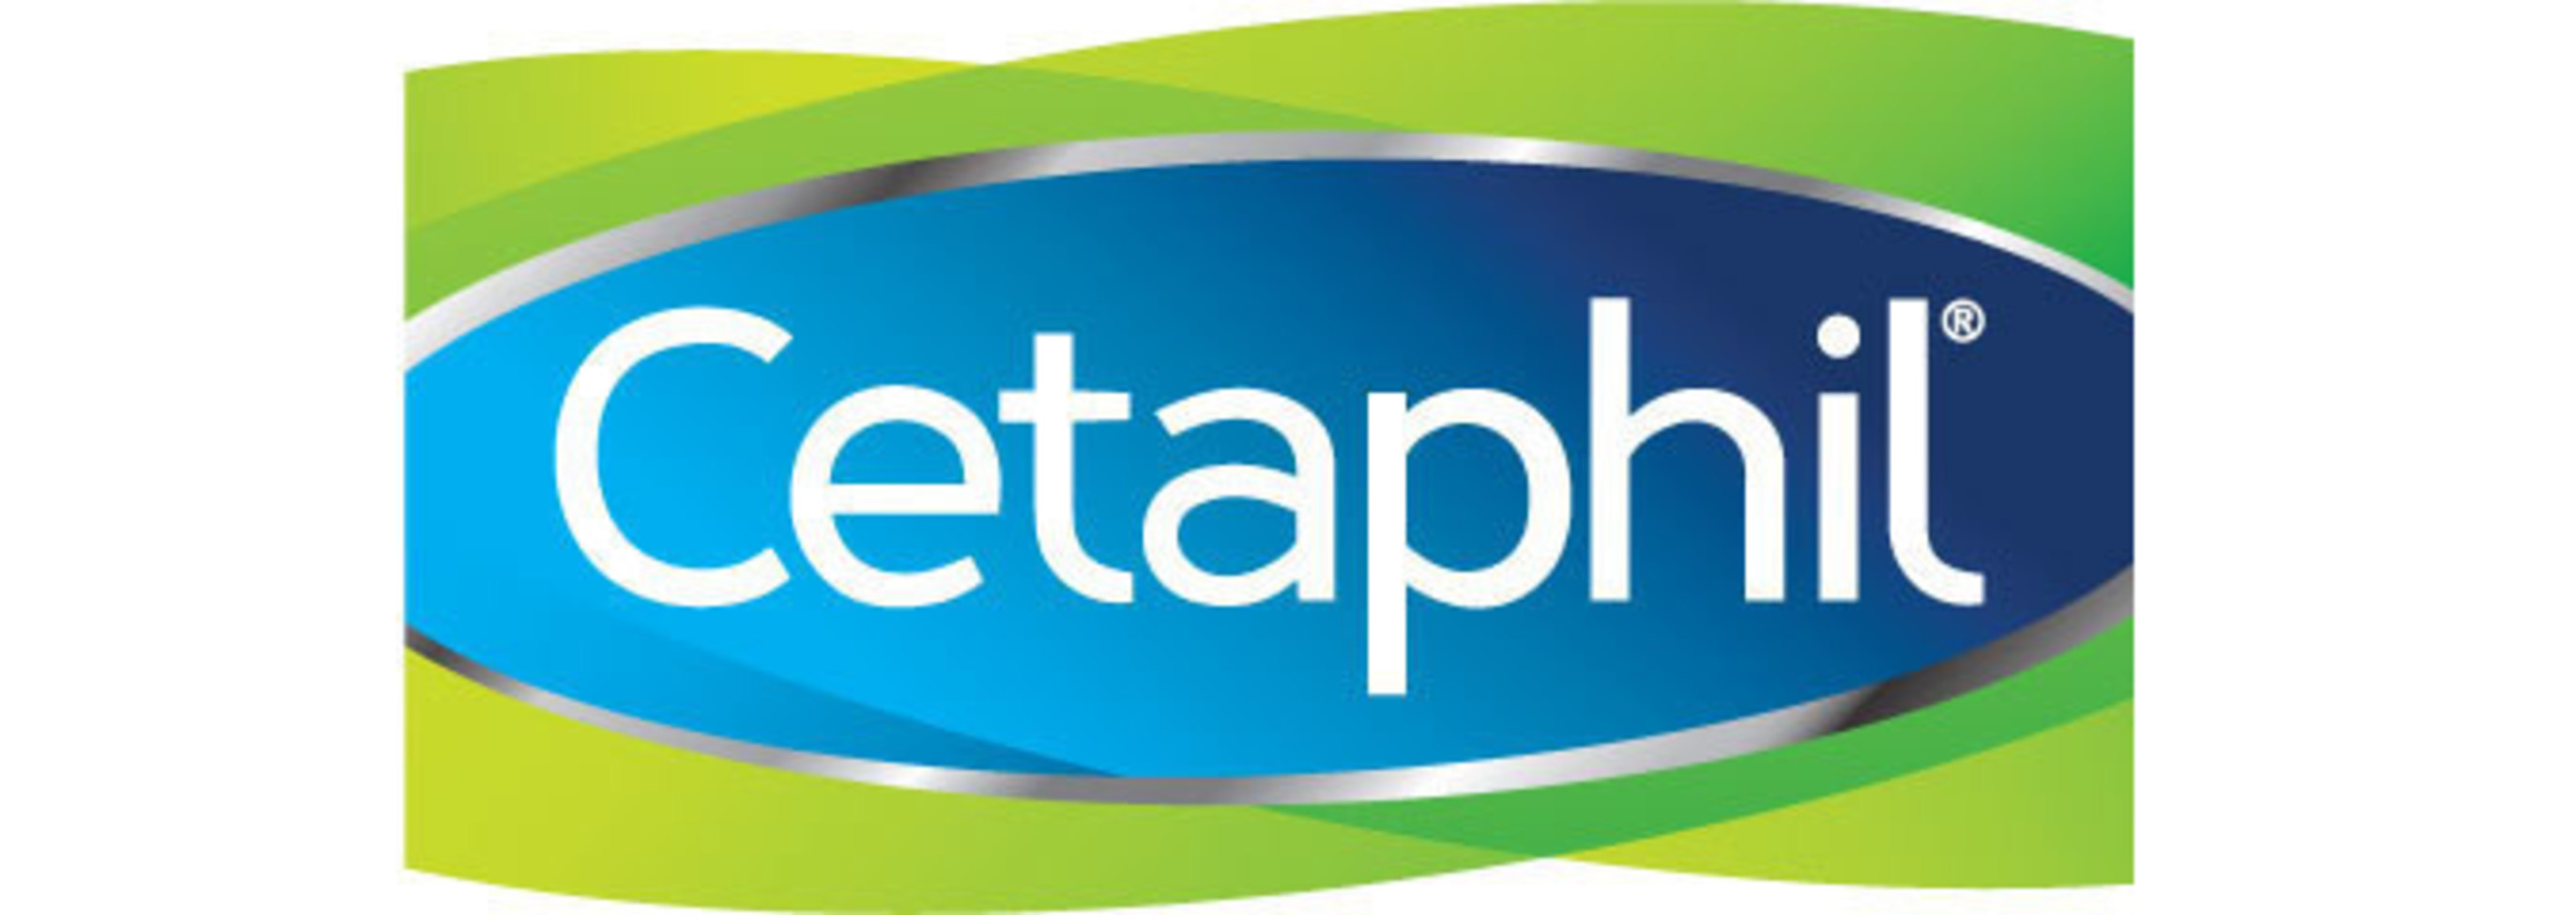 Cetaphil(R) Celebrates Its Fifth Year Supporting Children's Skin Disease Foundation (CSDF) and Camp Wonder